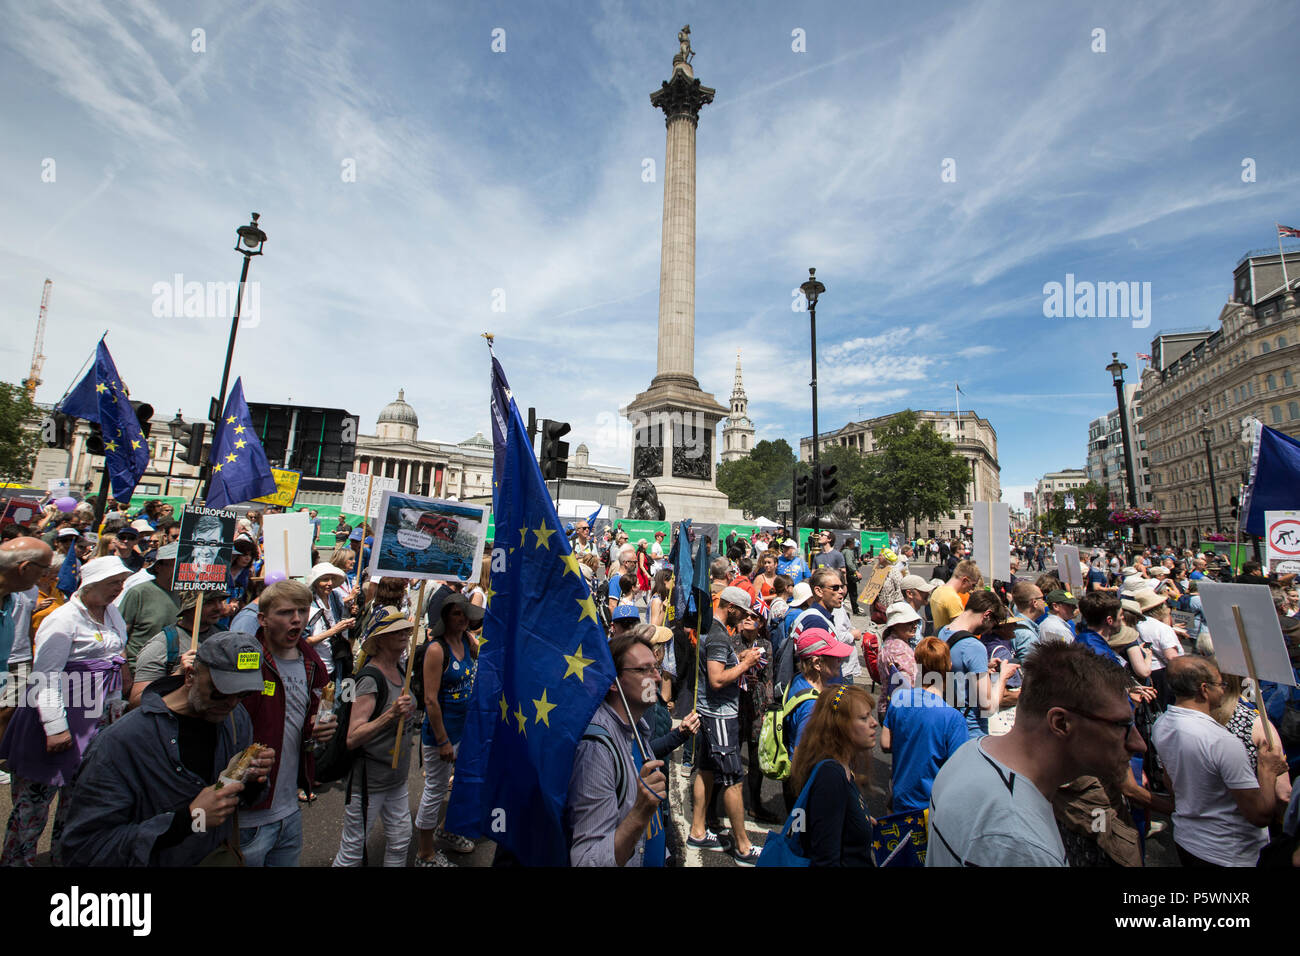 Biggest ever pro-European march held on 23rd June for a People's Vote. The protest coincides with the second anniversary of the Brexit referendum. Stock Photo